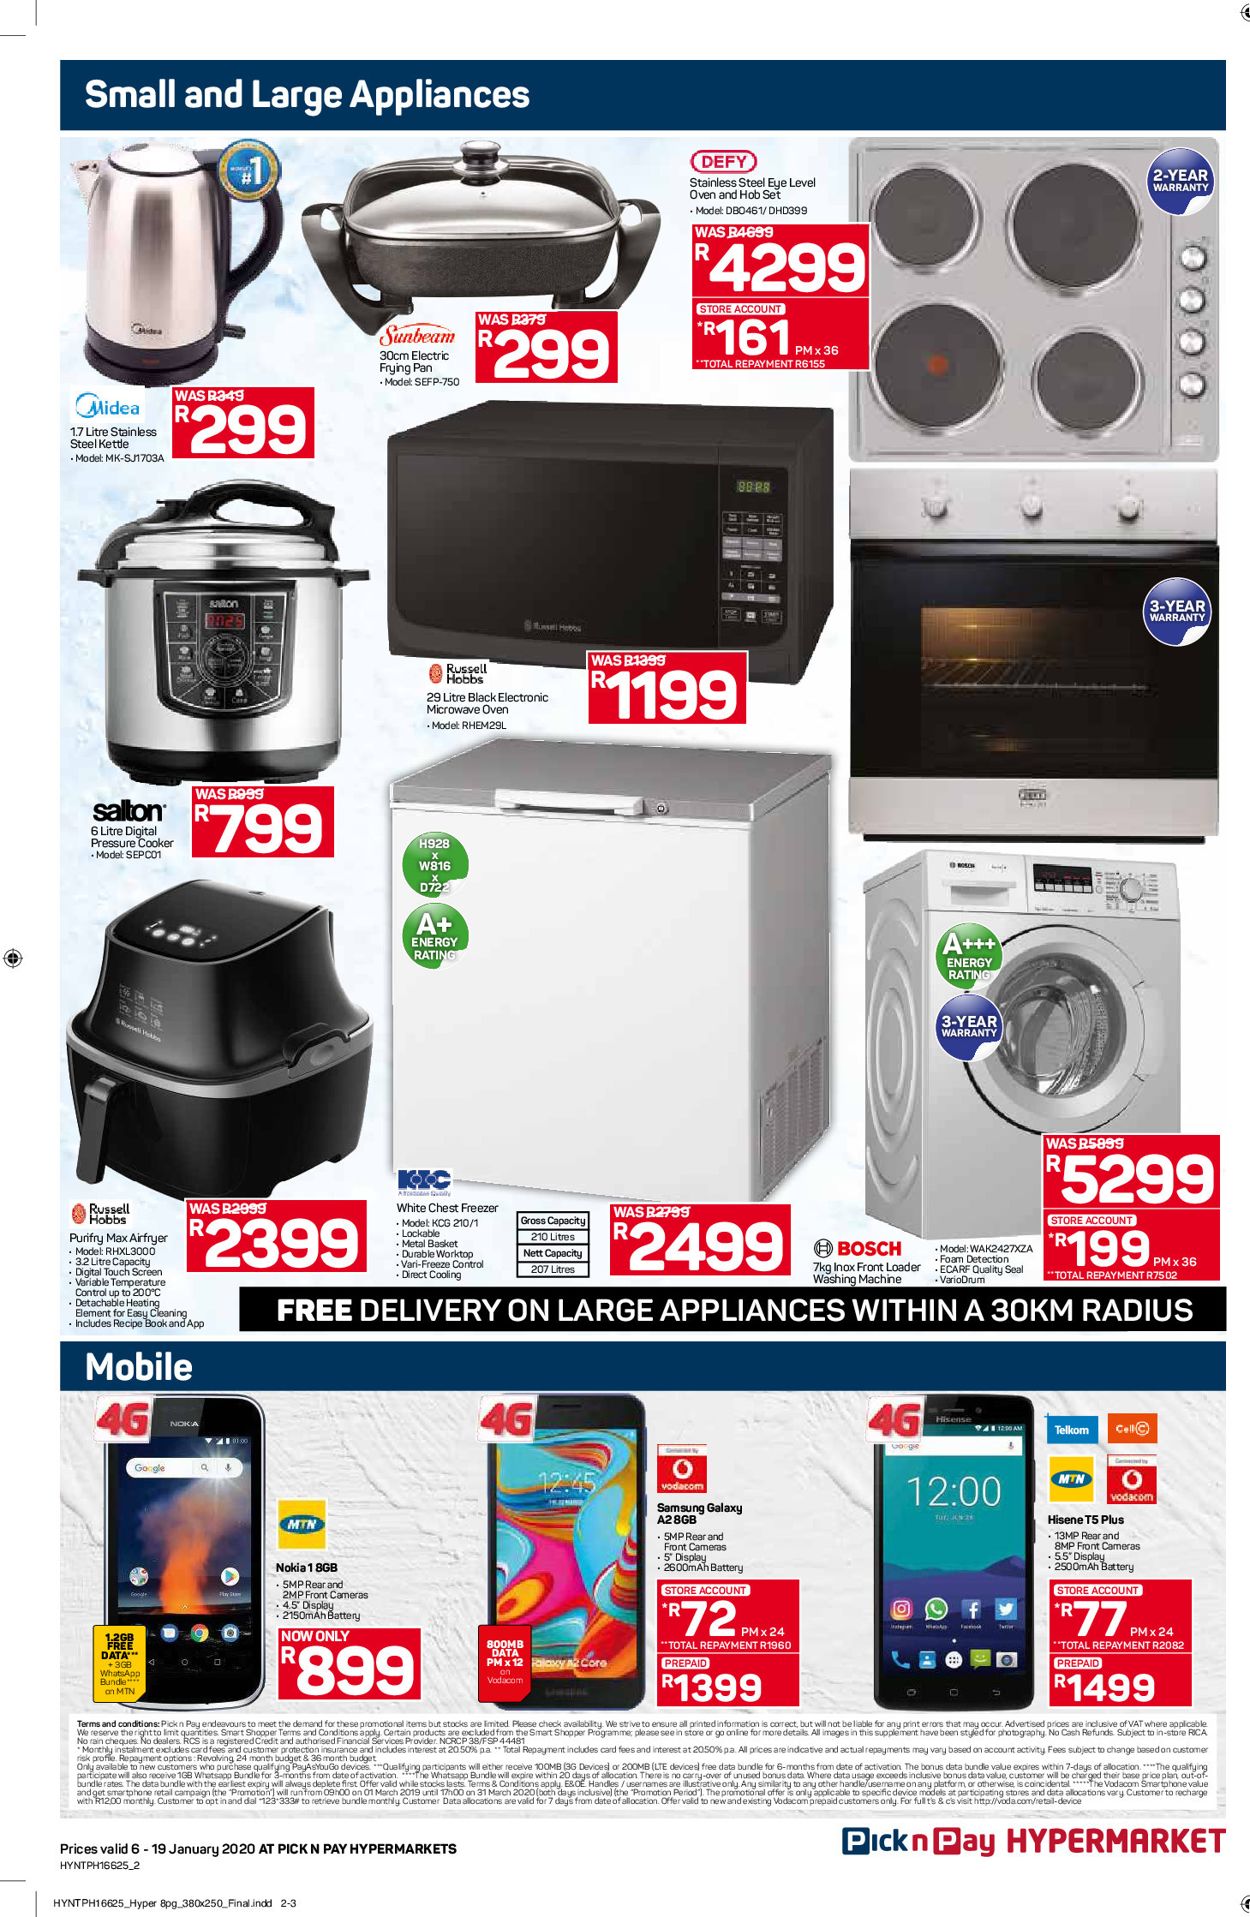 Pick n Pay Current catalogue 2020/01/06 2020/01/19 [3]